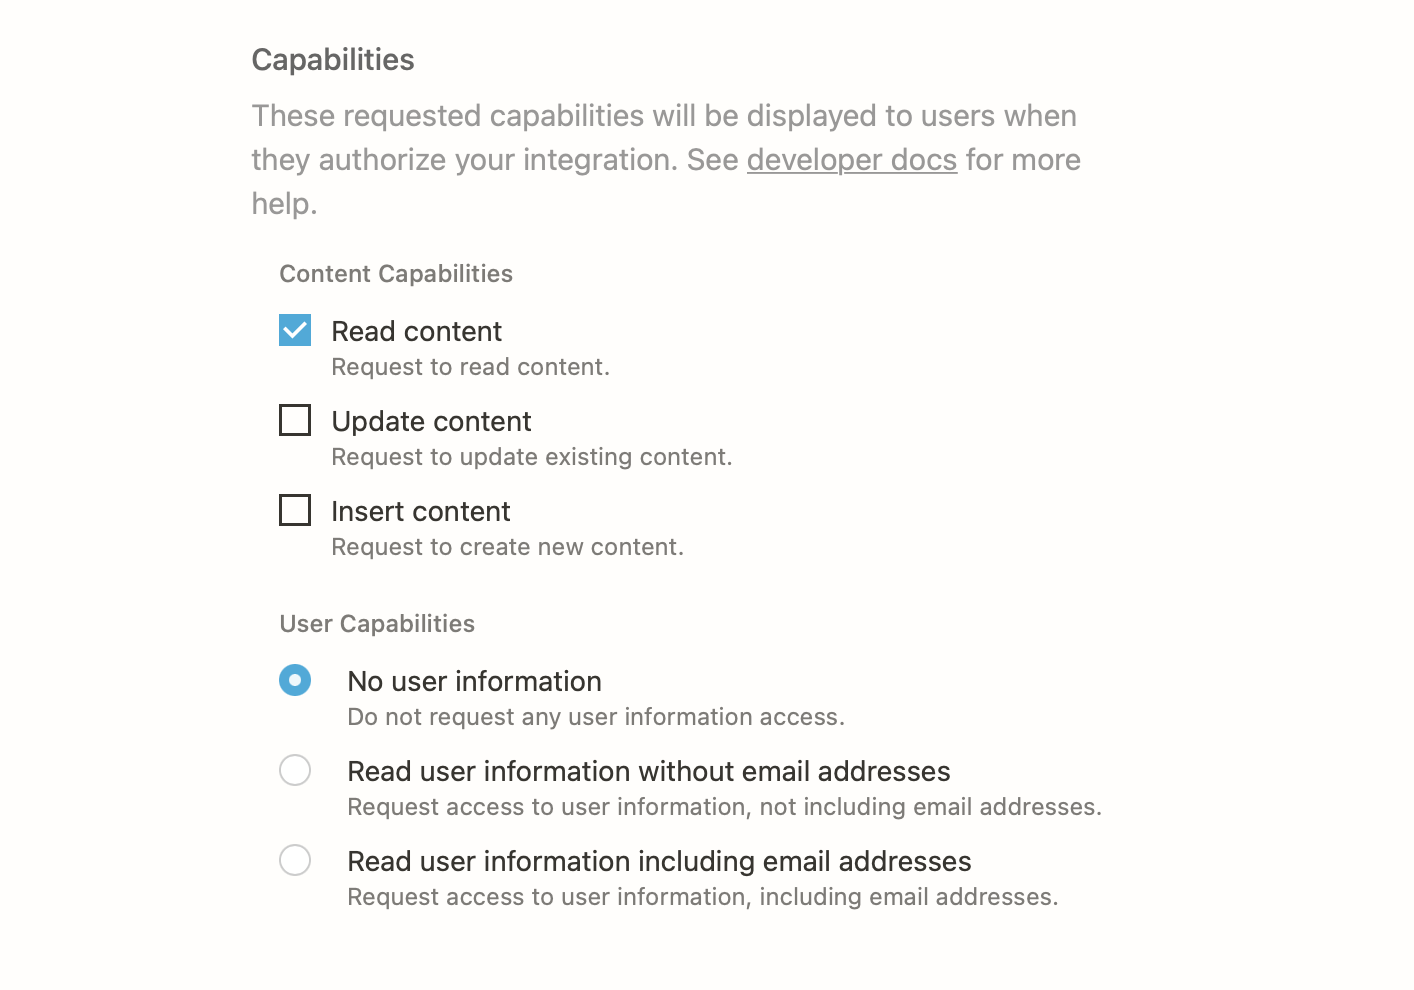 A screenshot of my integration’s capabilities. “Read content” is selected under content capabilities and “No user information” is selected under user capabilities.